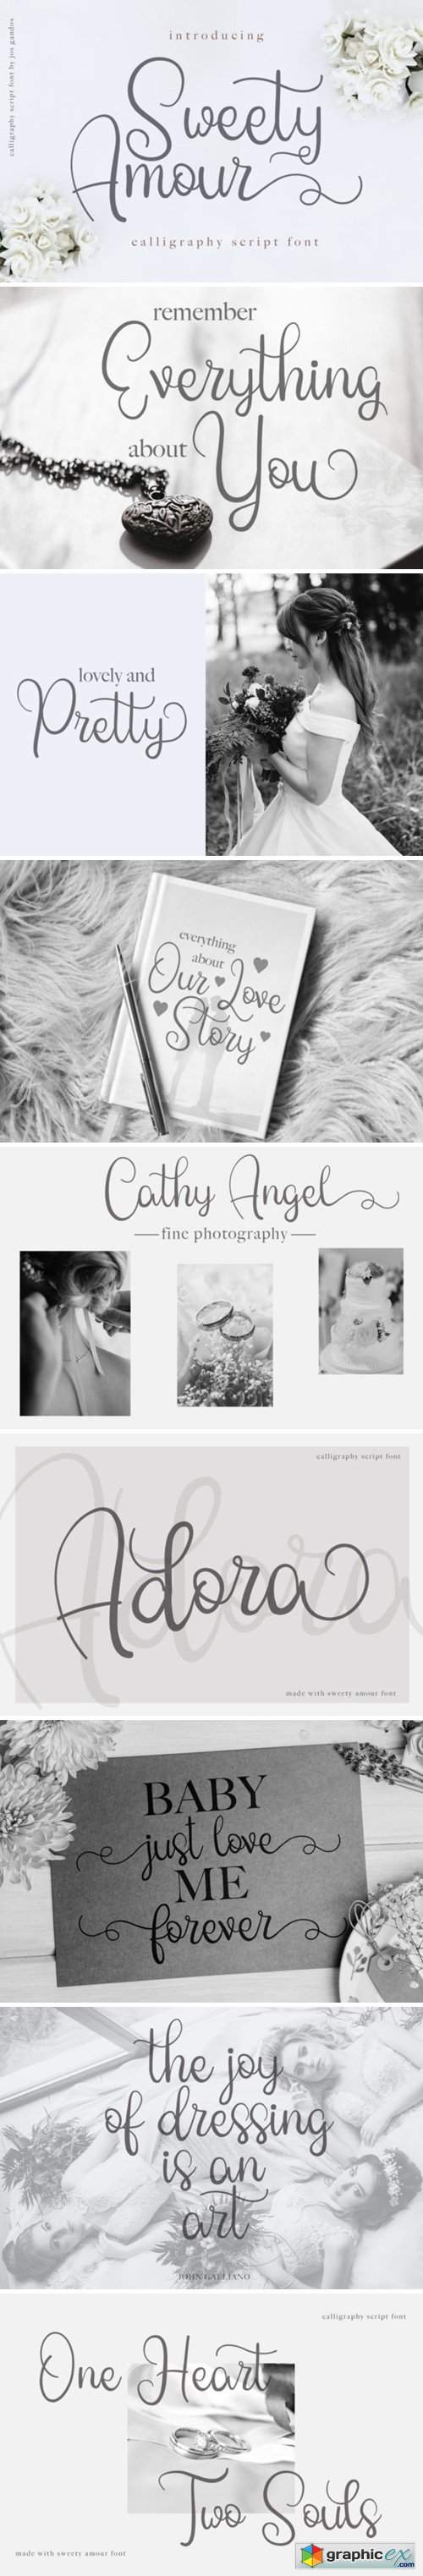 Sweety Amour Calligraphy Font